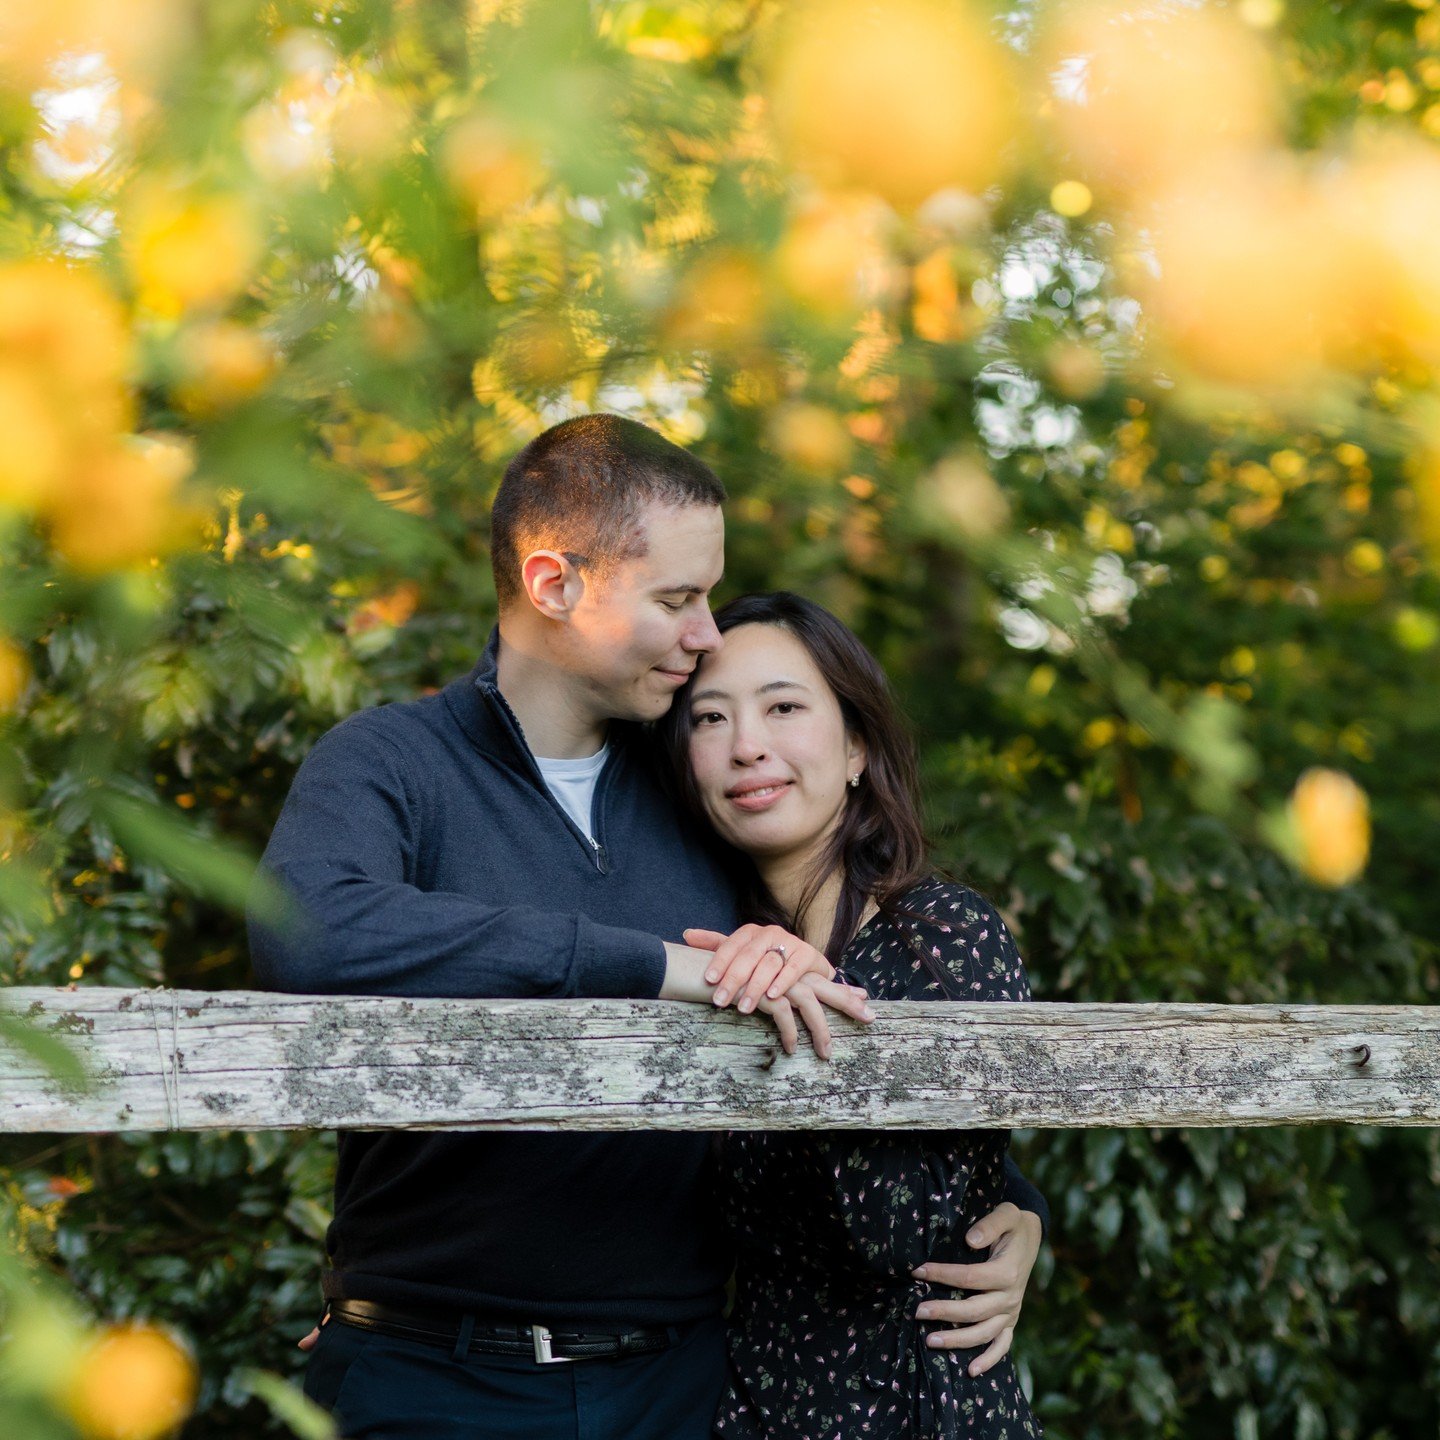 From our engagement shoot with Ben and Gianna. The yellow flowers framed them so beautifully. 

#engagement #engagementring #engagementphotos #2024bridetobe #victoriabc #vancouverislandphotographer